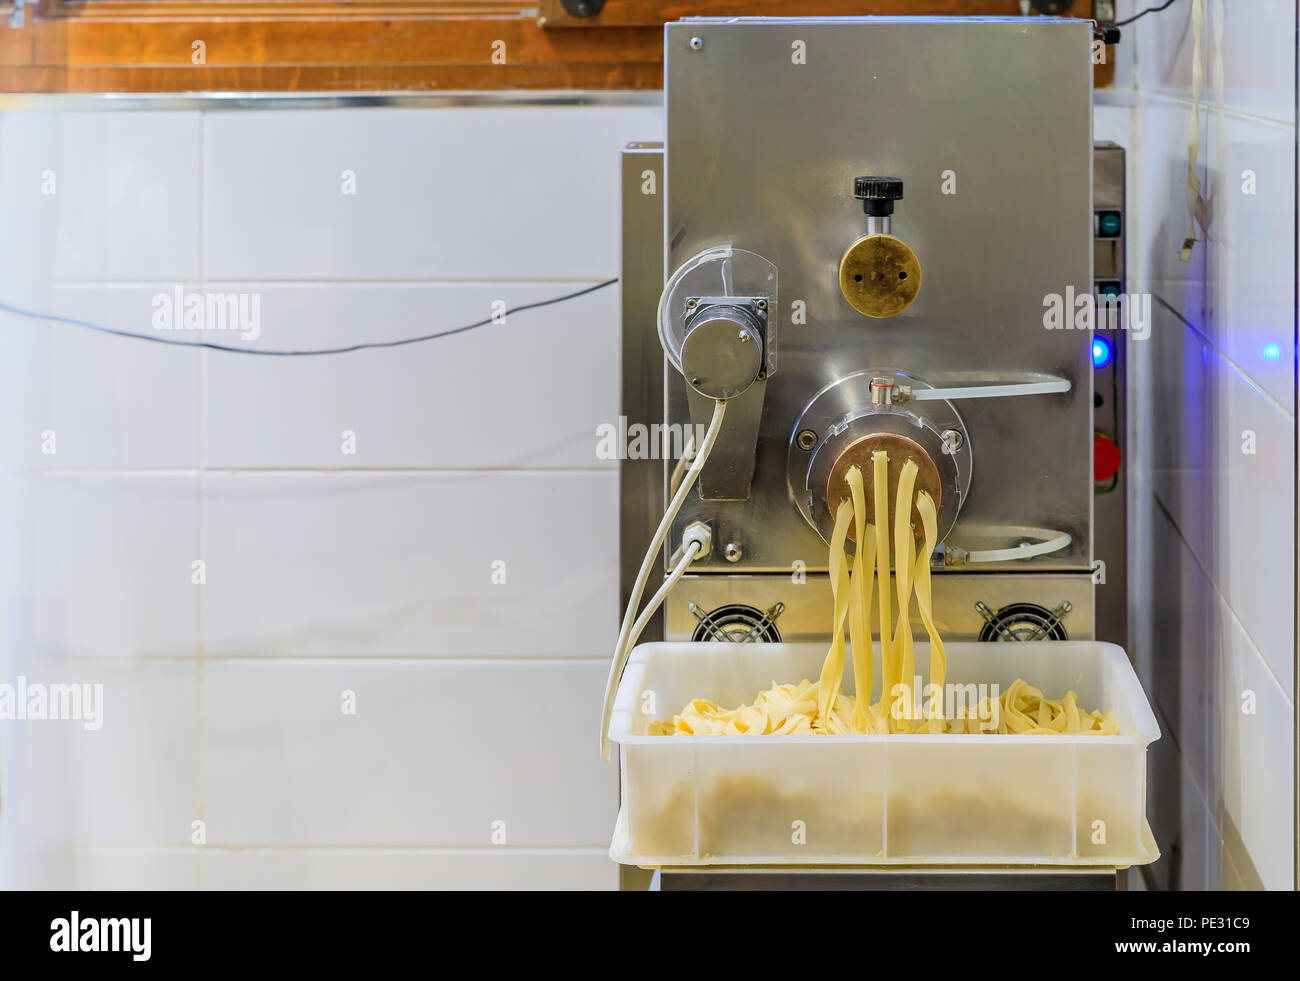 Industrial pasta maker pushing out fresh pasta at an Italian restaurant Stock Photo